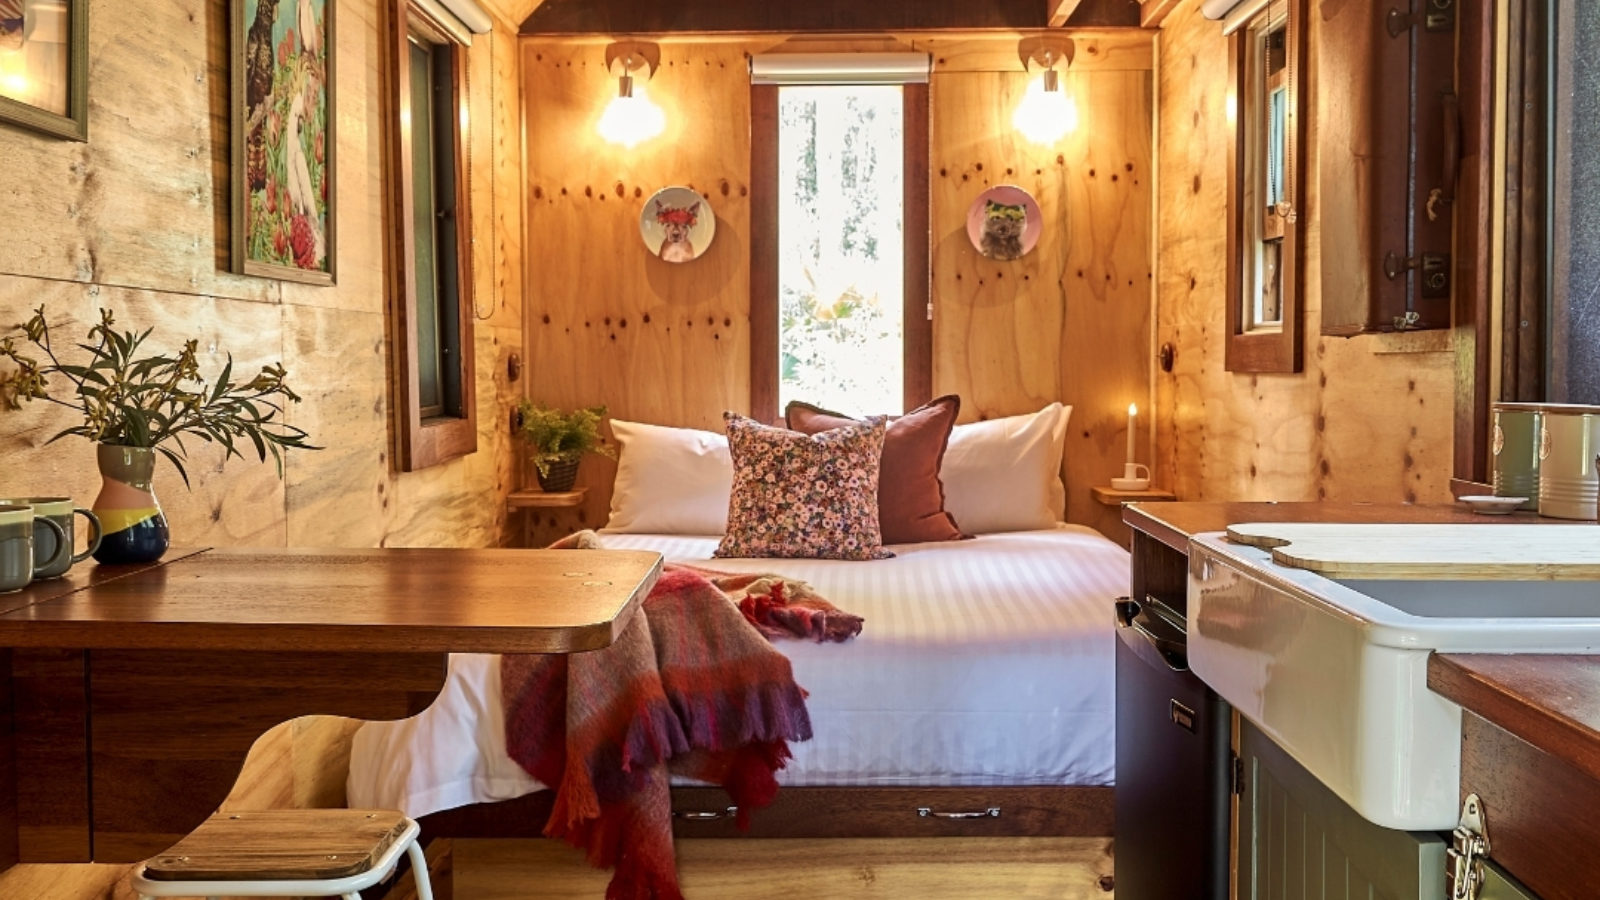 Myall River Camp tiny house interior bedroom space